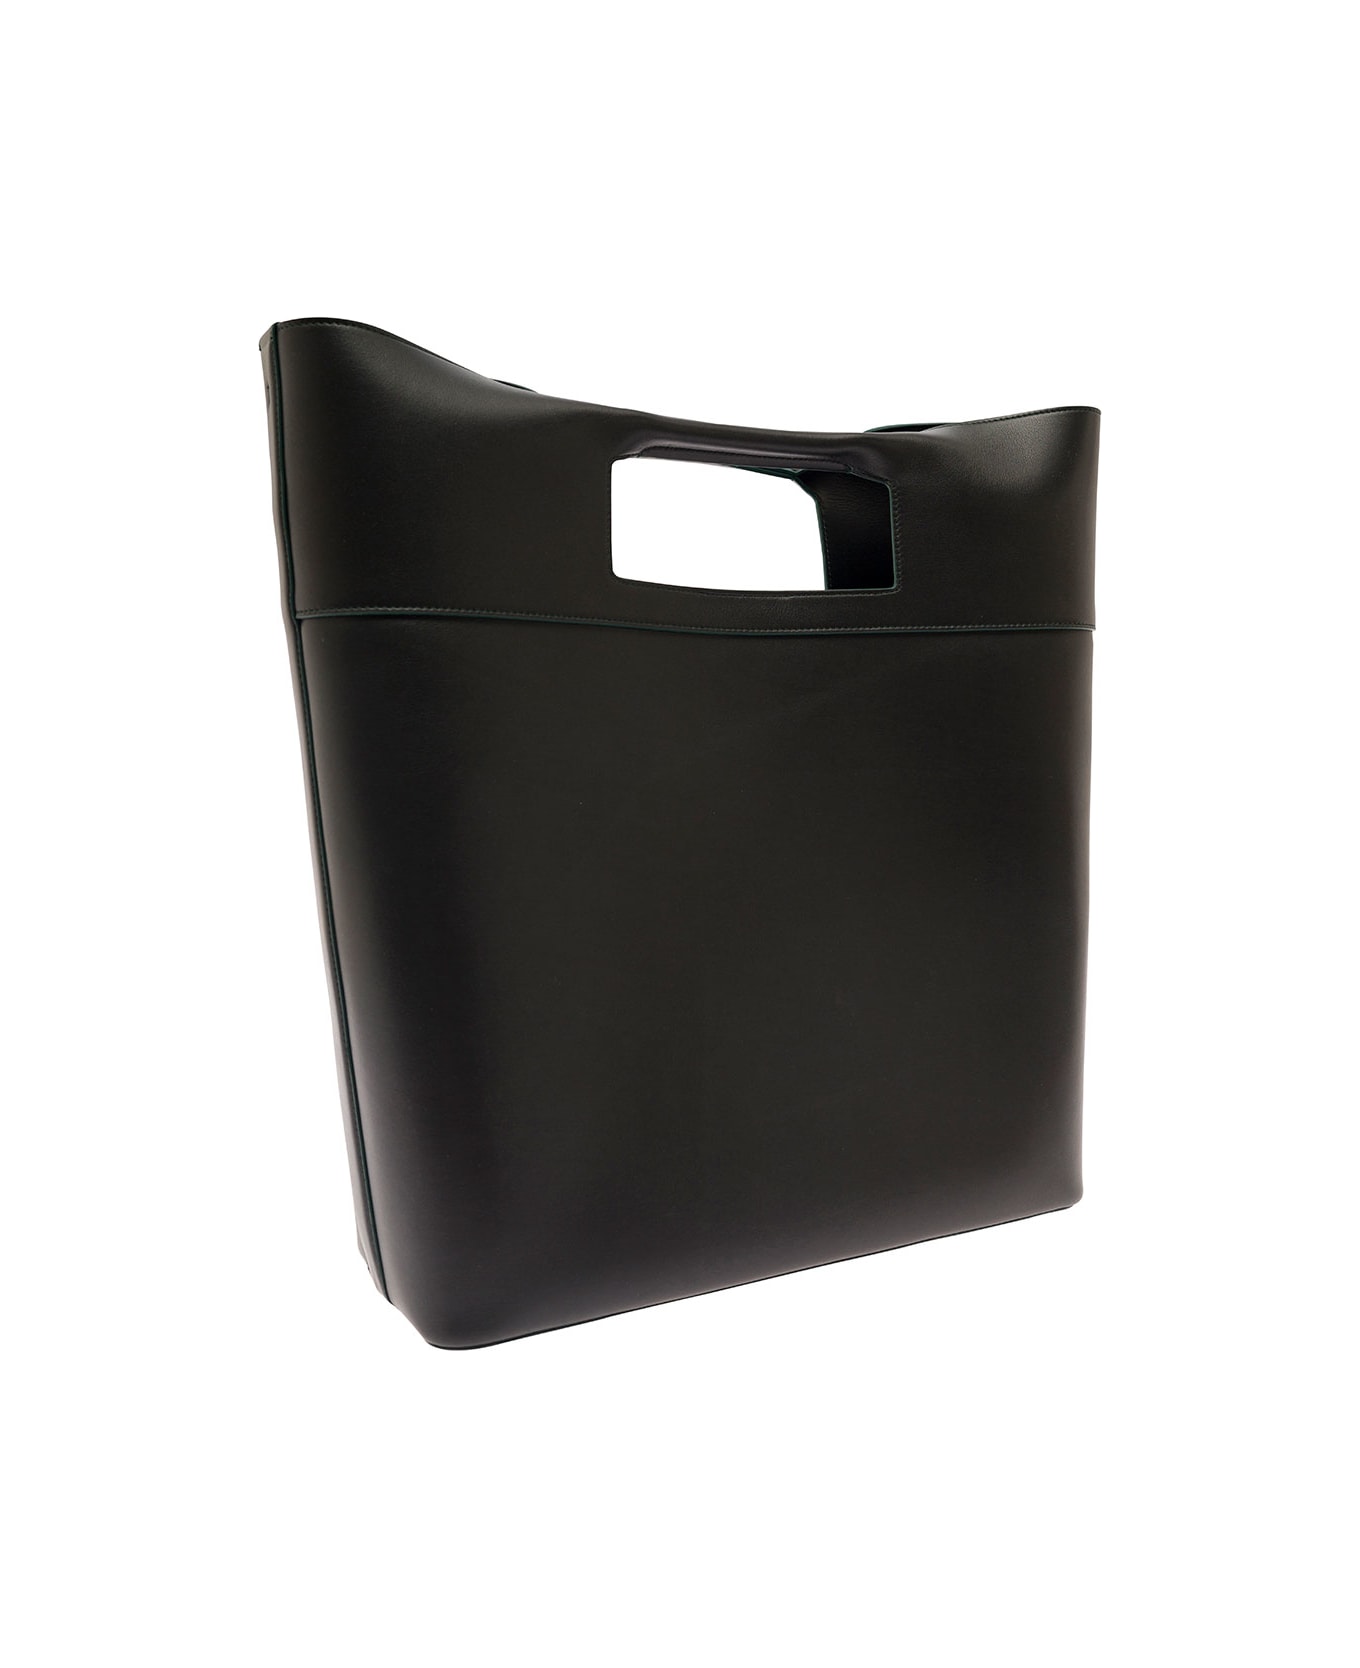 Alexander McQueen 'the Small Square Bow' Black Shopping Bag With A Cut-out Bow Section In Leather Man - Black トートバッグ